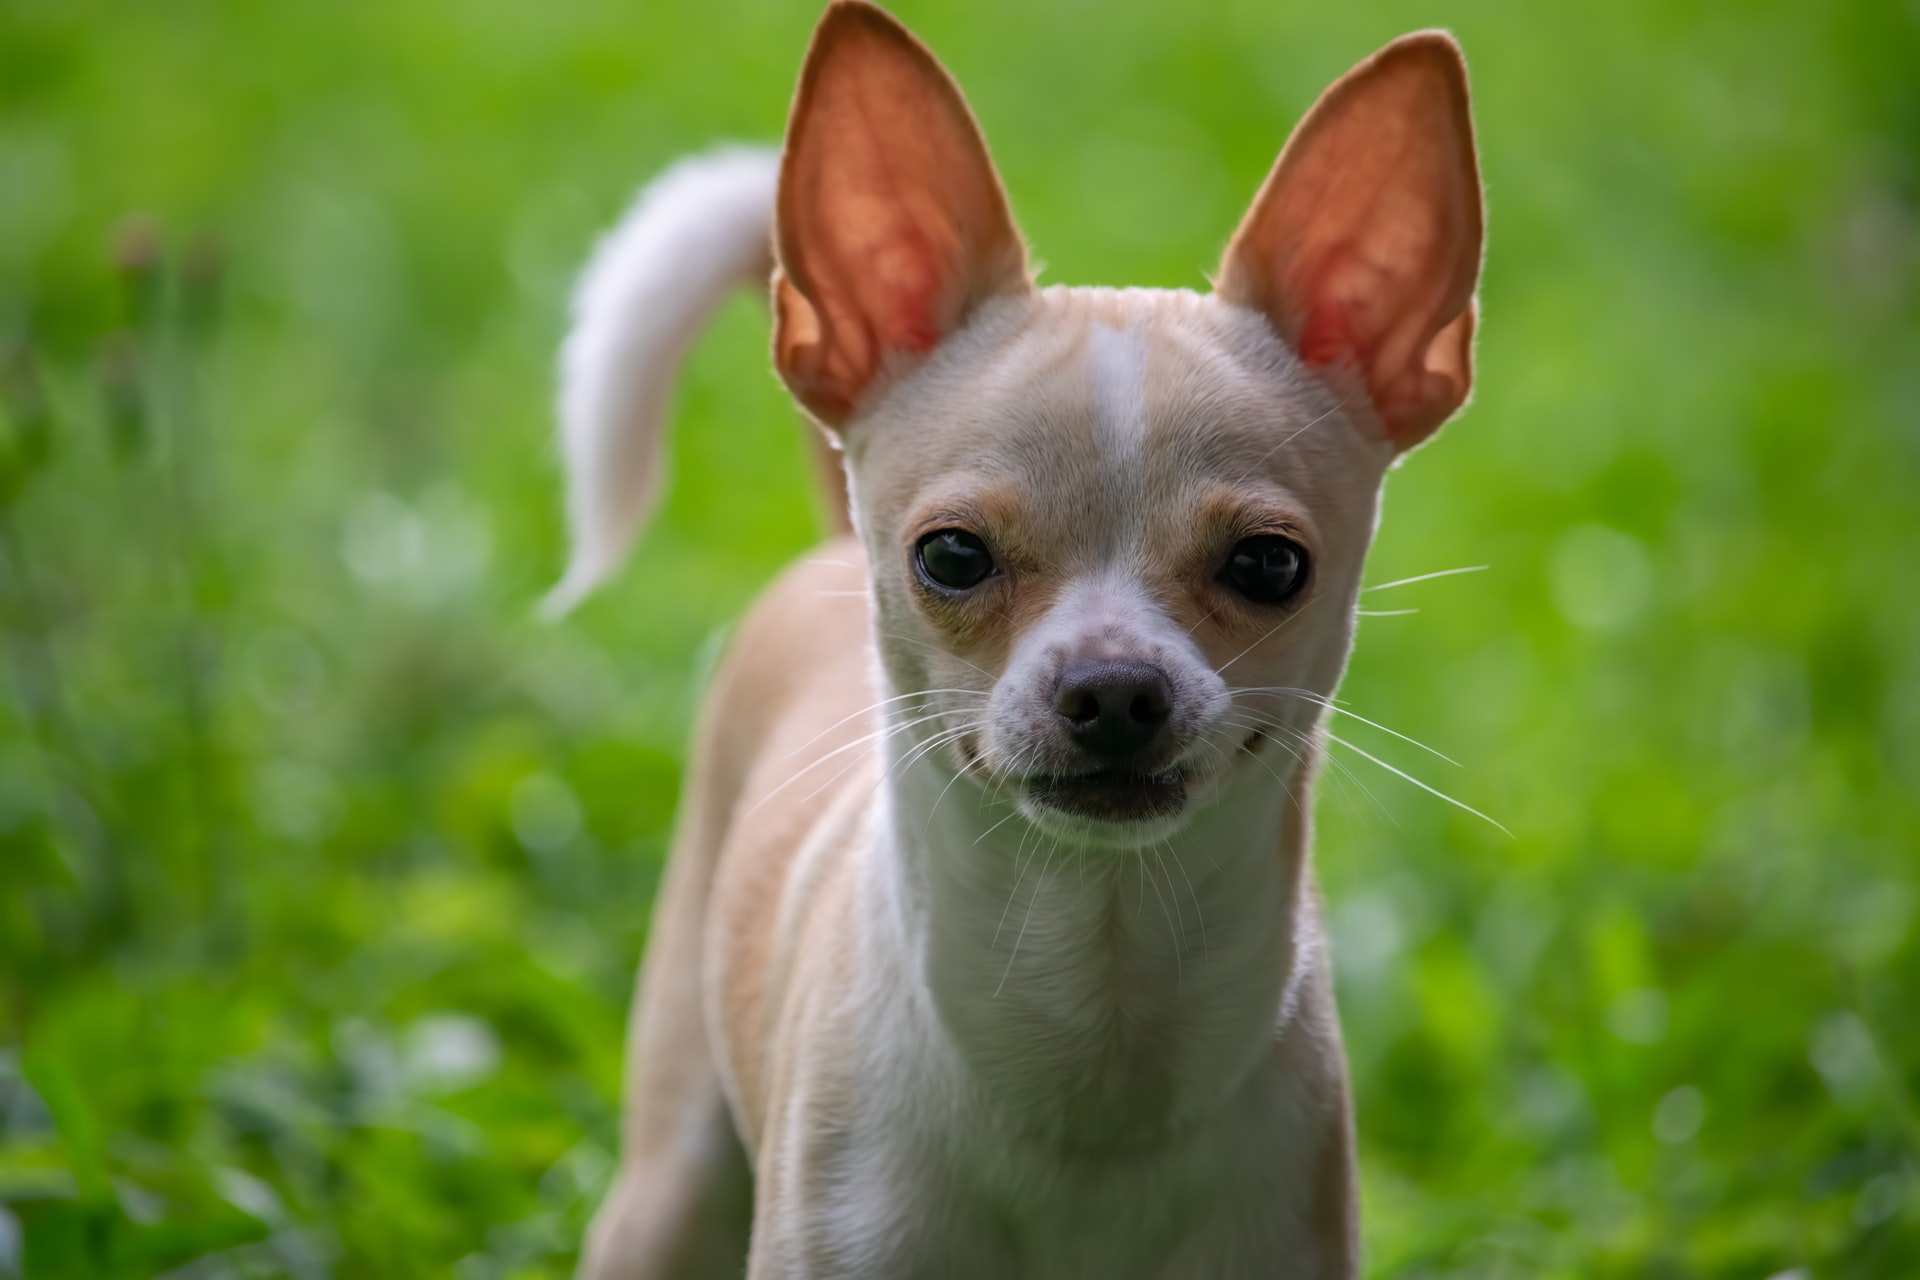 When to Be Concerned About Your Staring Chihuahua?